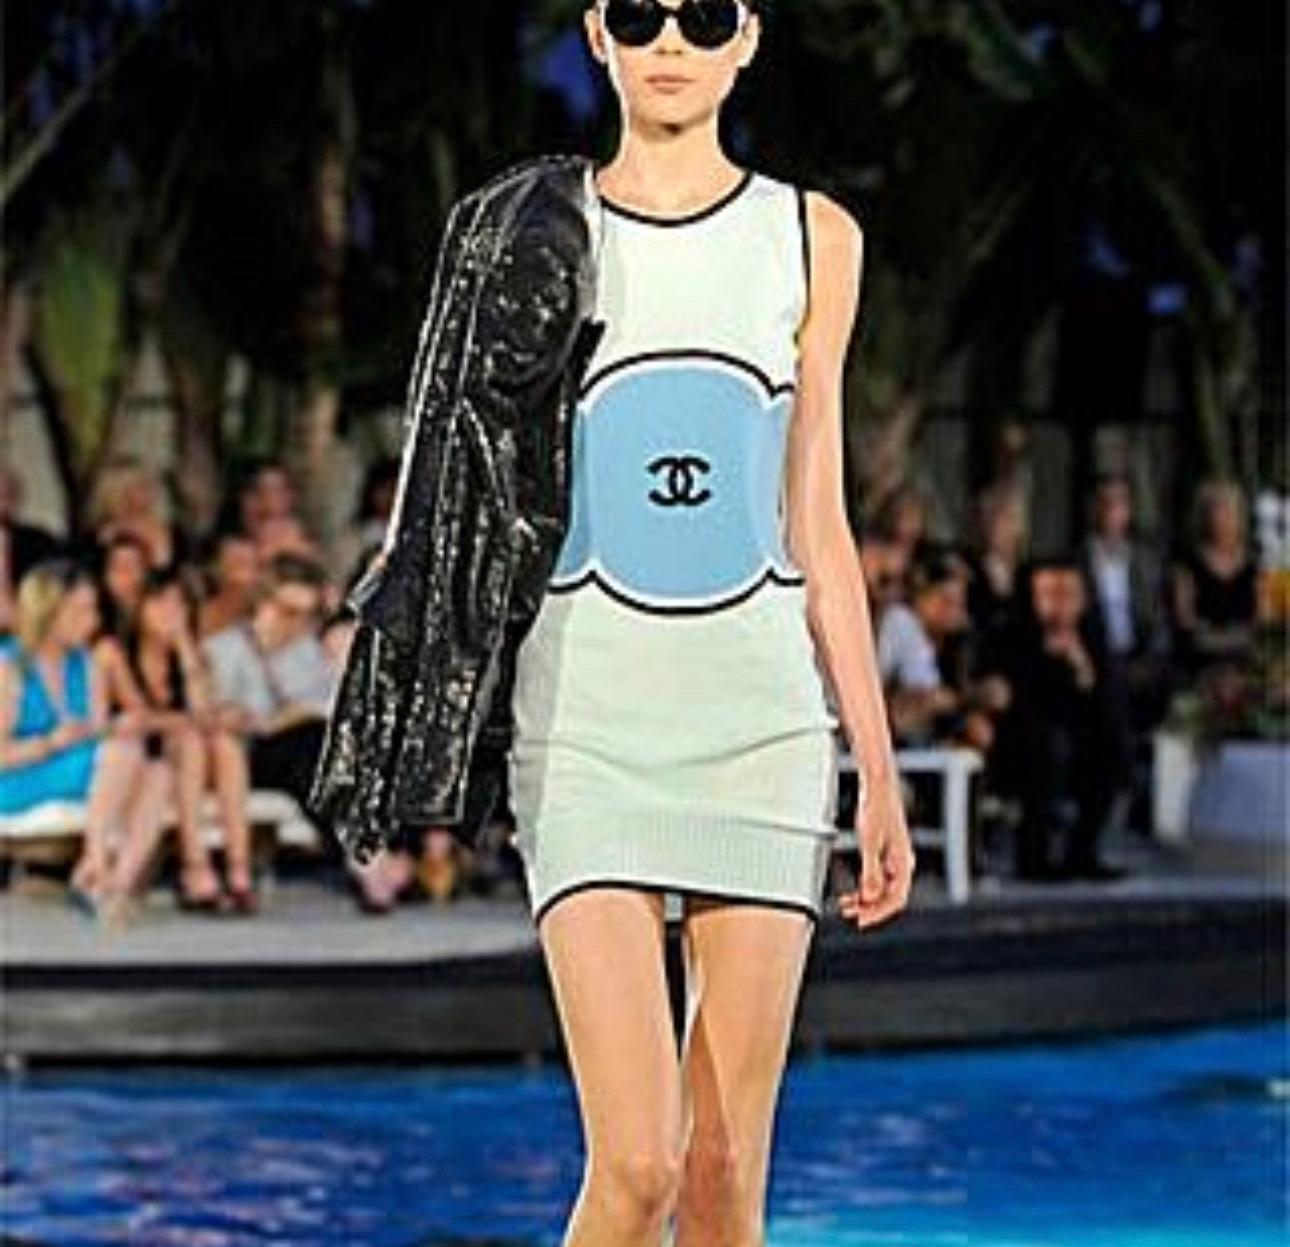 FROM AN EARLY CHANEL CRUISE 2009 COLLECTION, THIS GREEN KNIT DRESS IS MADE OF CASHMERE. INCREDIBLY RARE AND SPECIAL FOR COLLECTORS. FEATURES A BLACK CC LOGO IN THE CENTER, WITH A BLUE BORDER AROUND IT. THE PIECE CAN STRETCH TO FIT VARIOUS SIZES AND